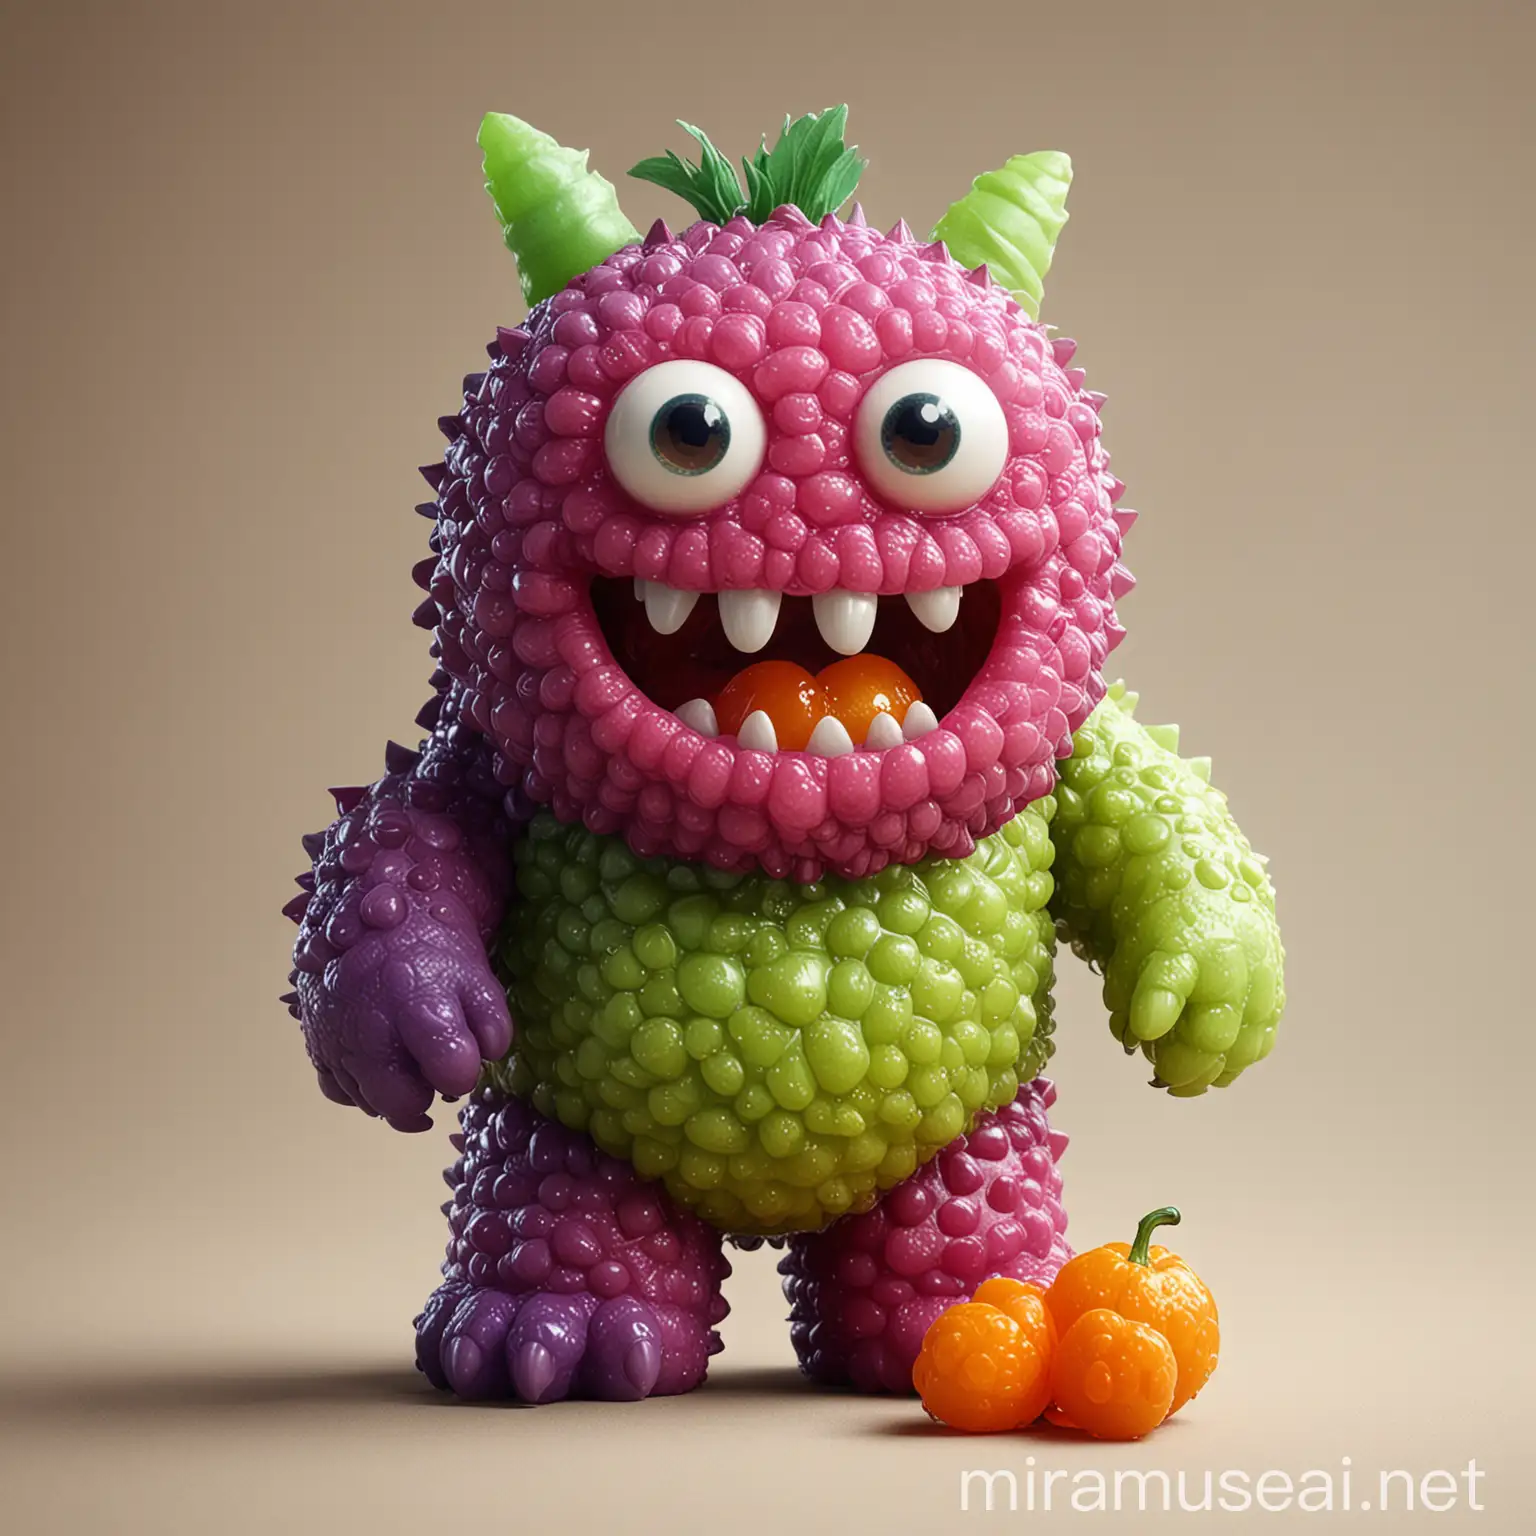  Friendly monster made of gummy-textured fruits